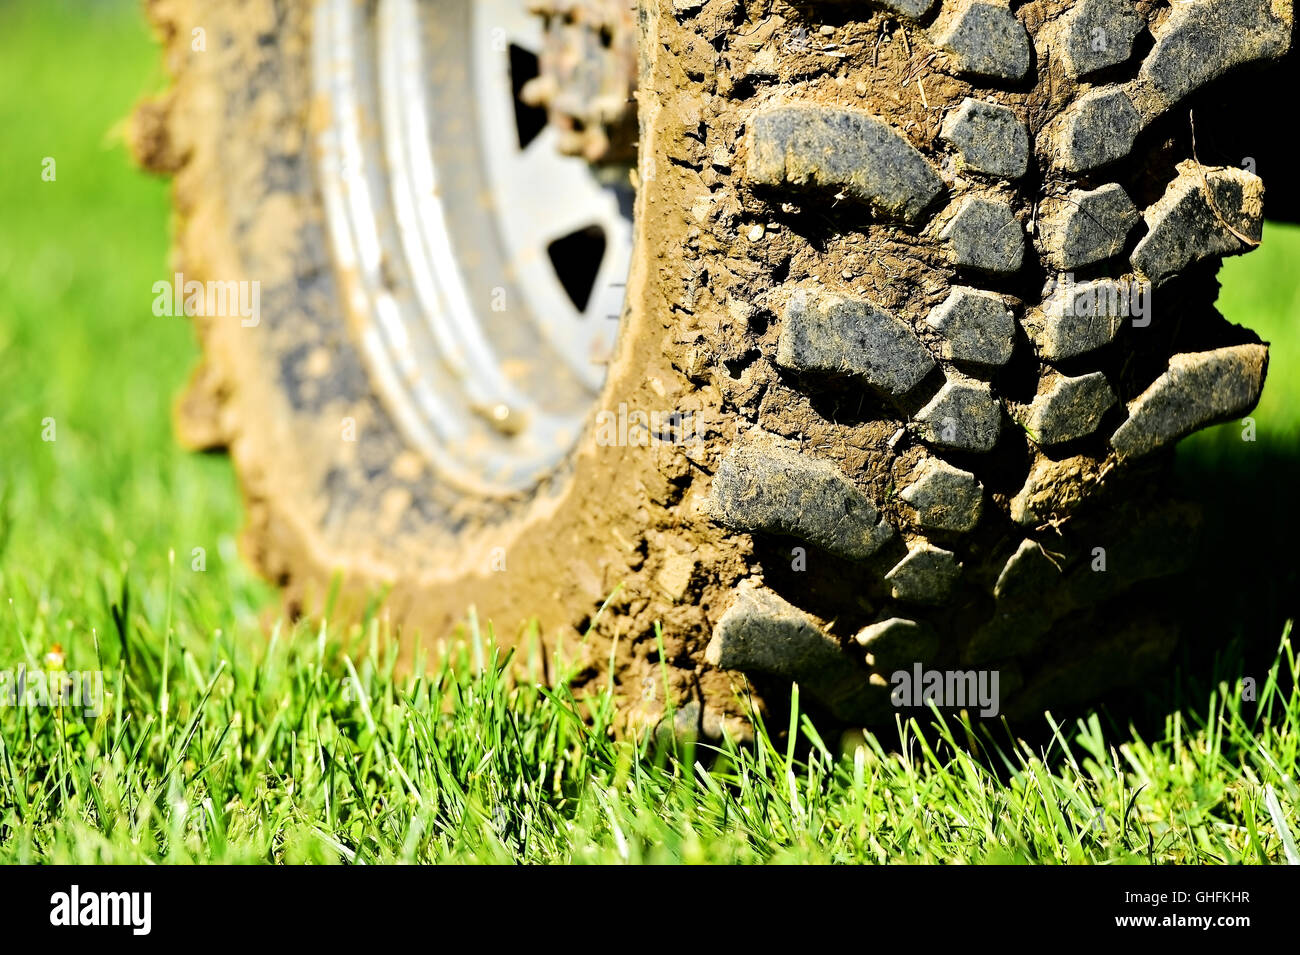 Premium AI Image  A tire in the mud is in the water and the grass is  covered in mud.